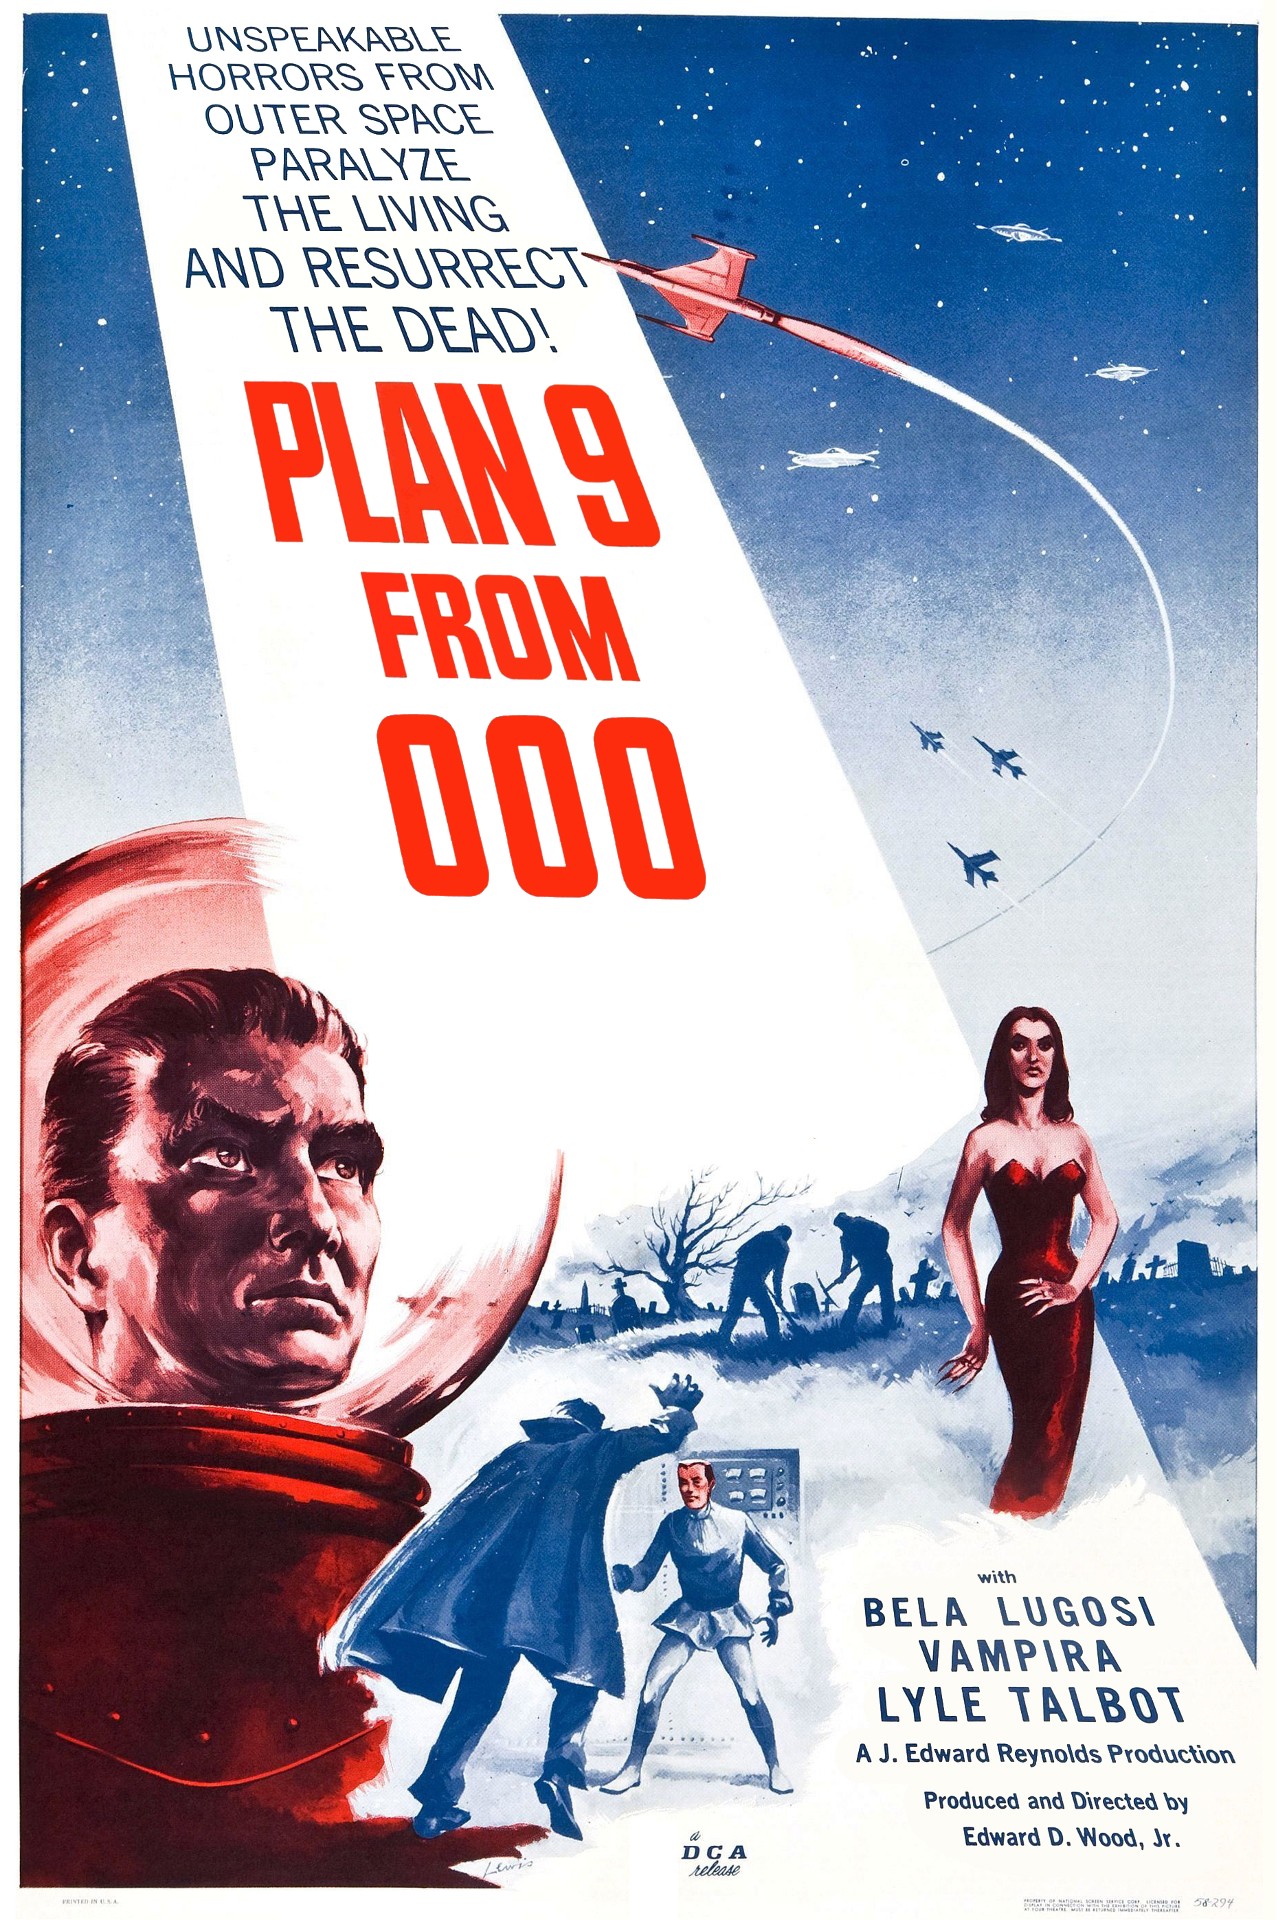 Plan 9 from OOO